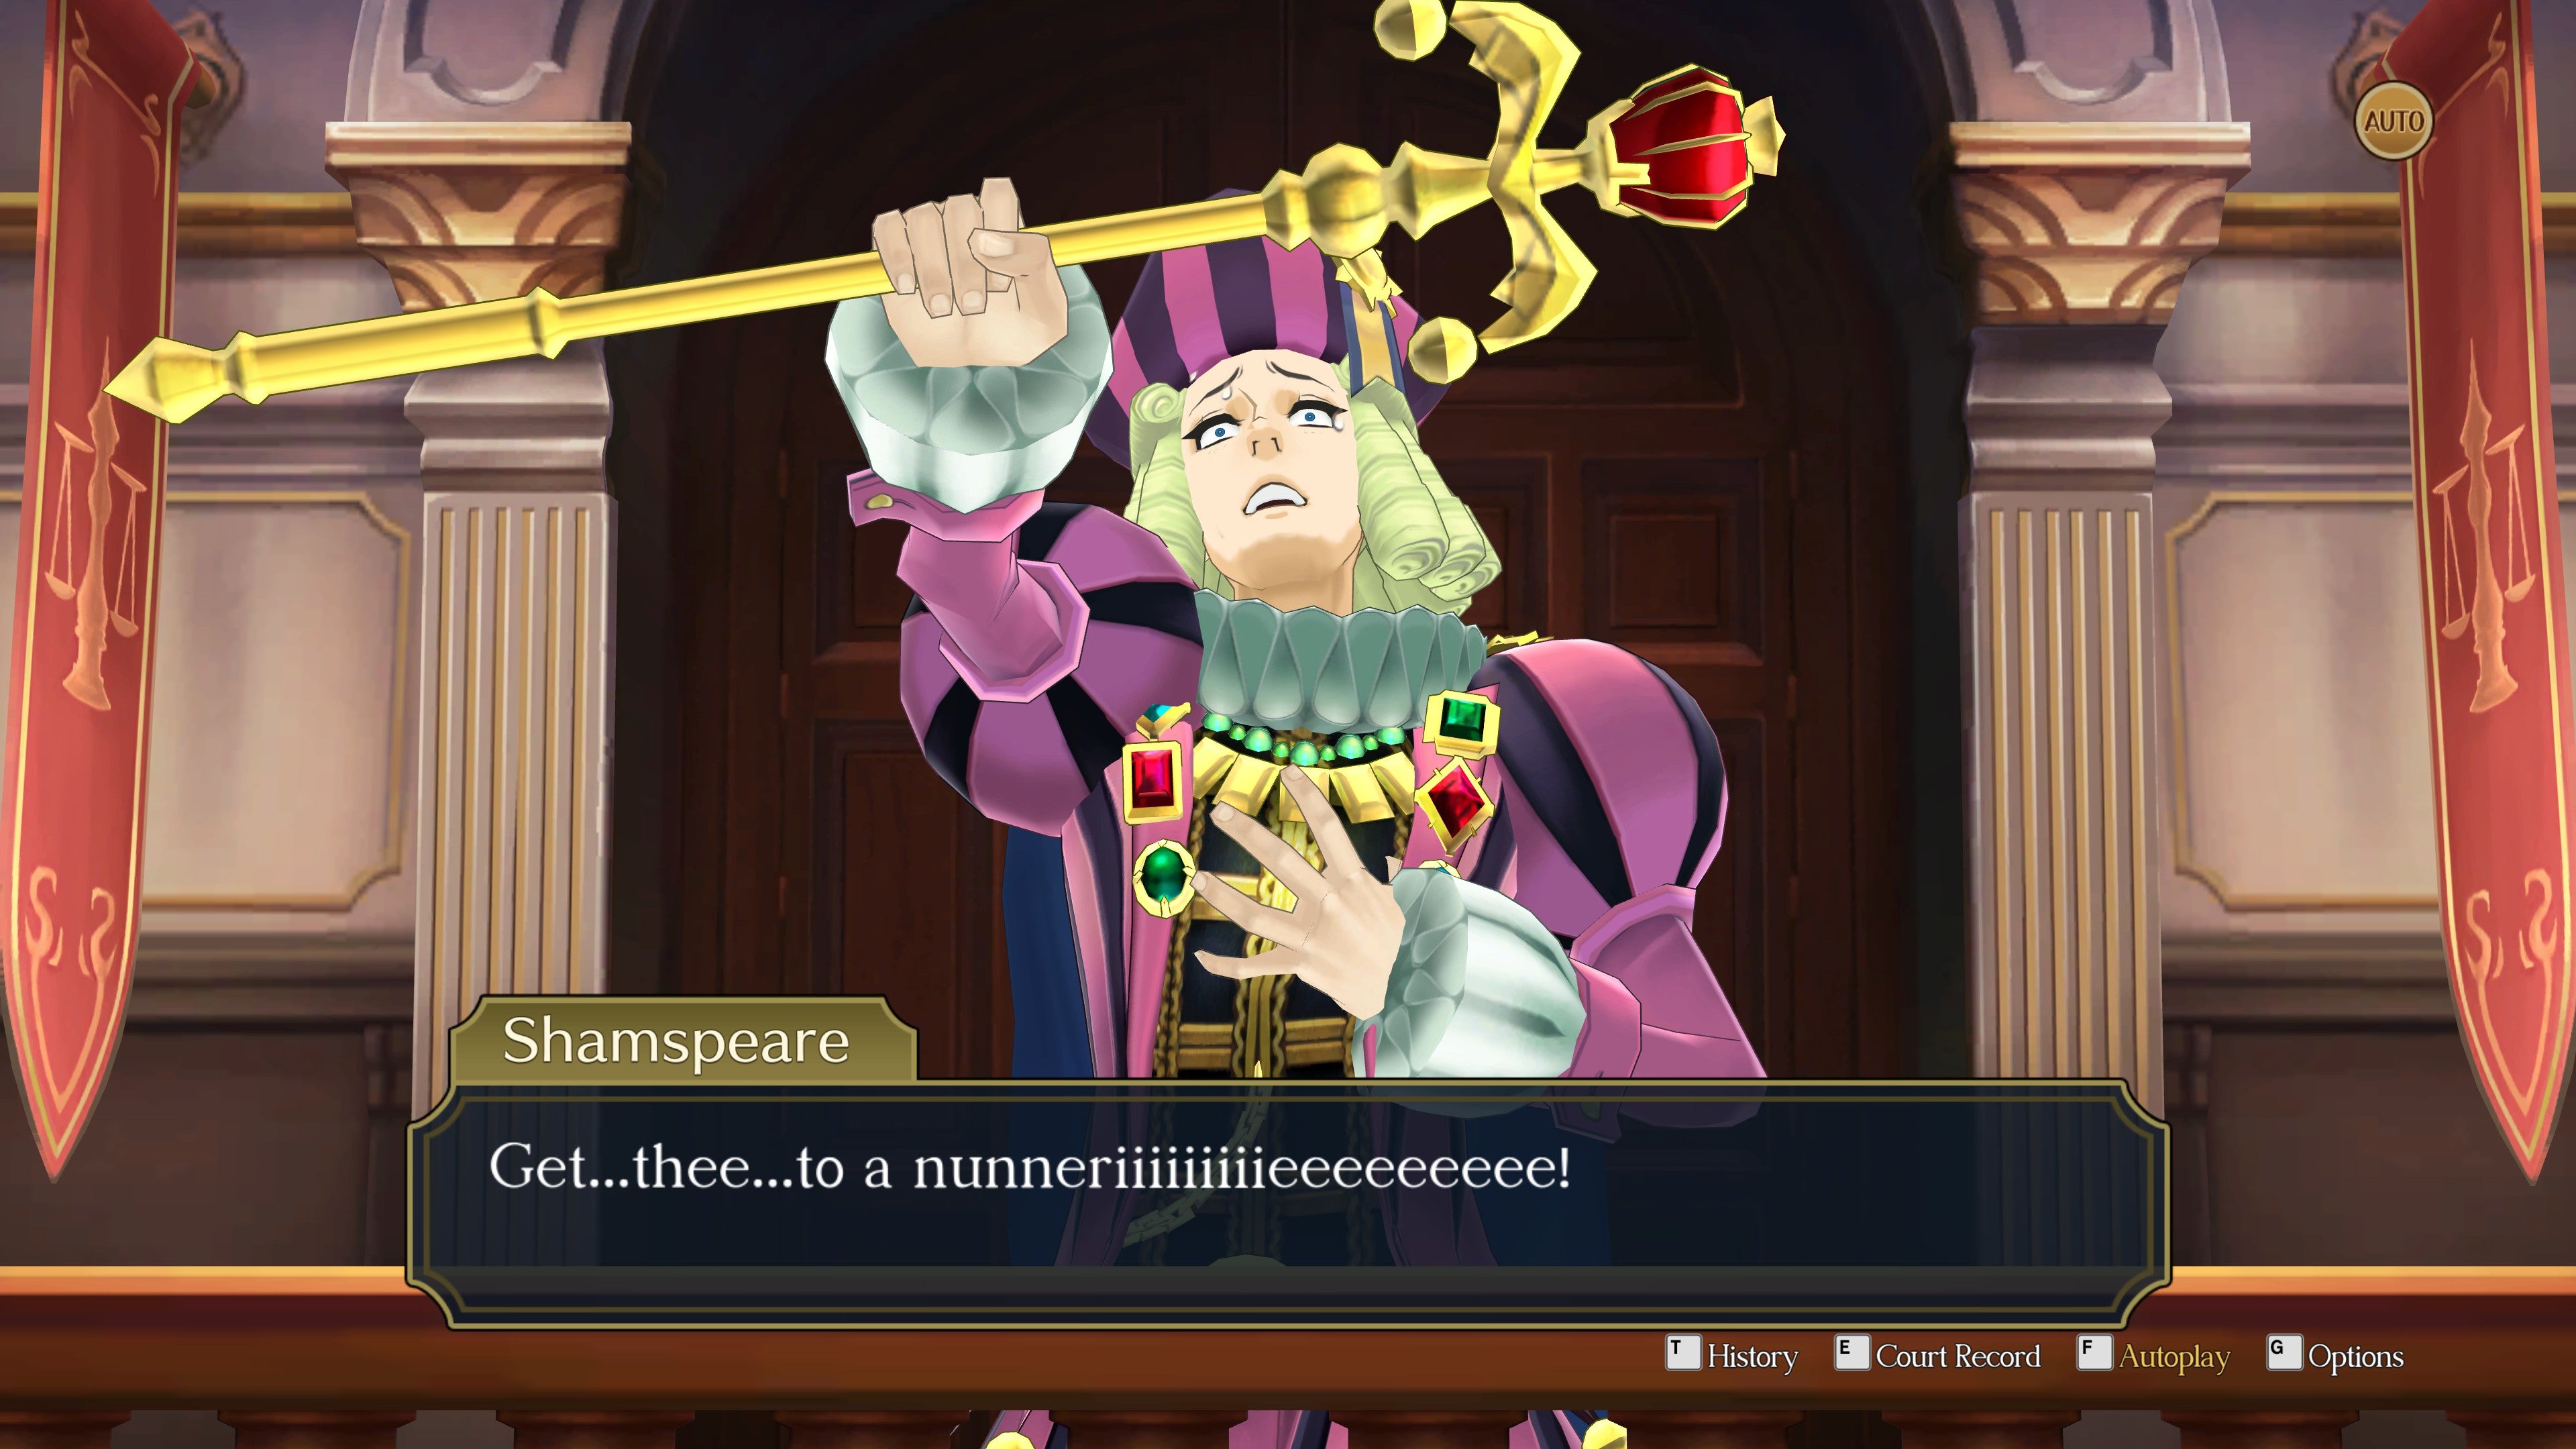 Shamspeare cries Get Thee to a nunnery in The Great Ace Attorney Chronicles